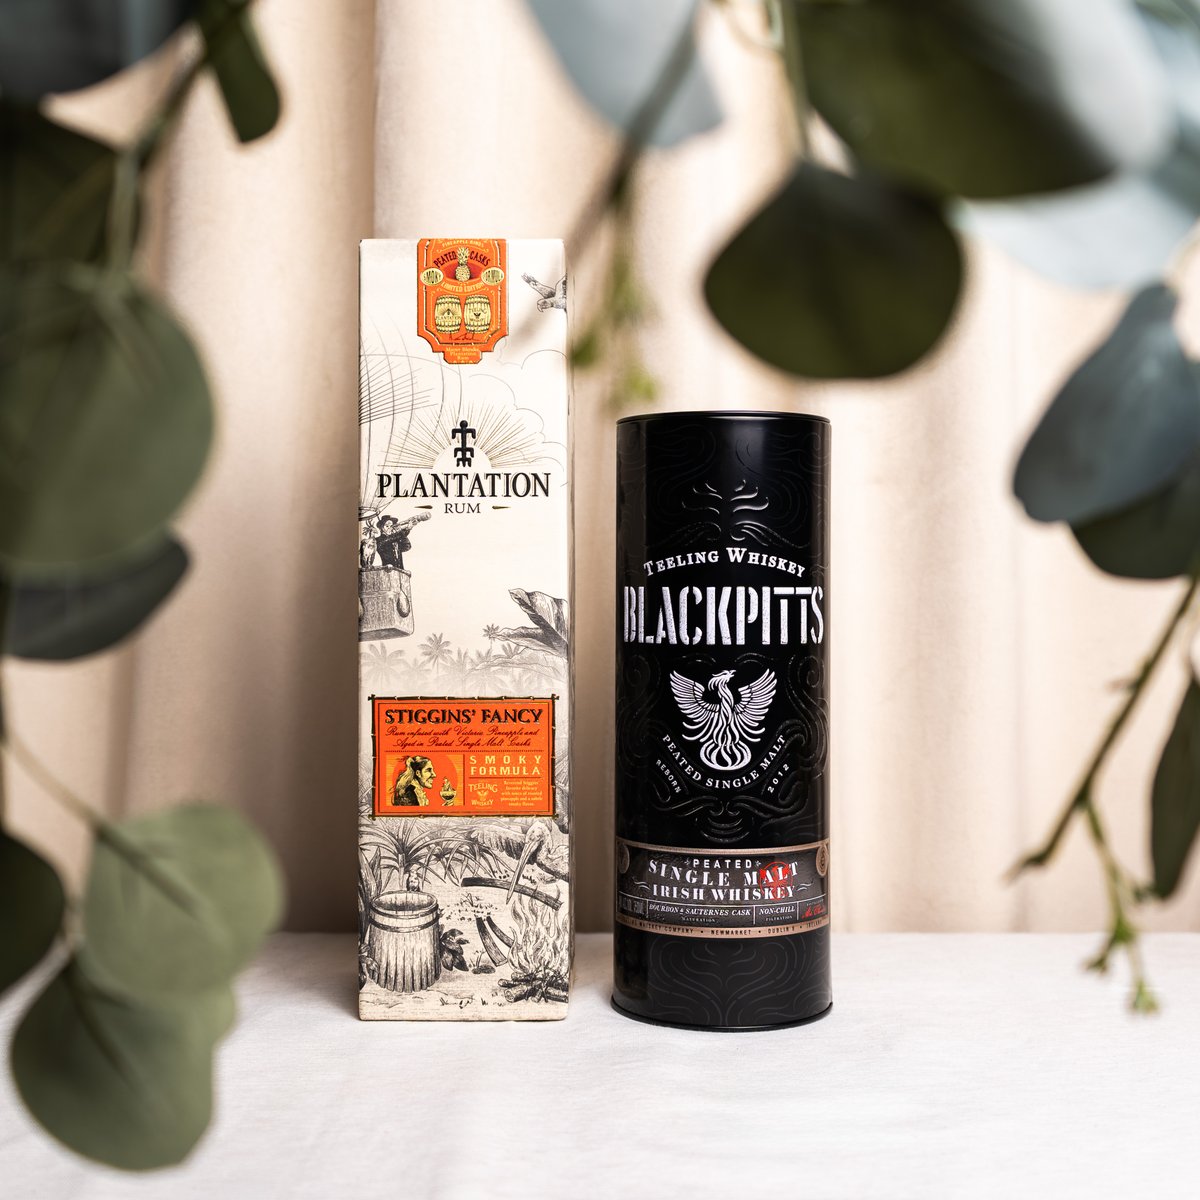 Sip on some lightly smoked spirits or add subtle smoke to your cocktails. Plantation Stiggins' Fancy Smoky Rum and @TeelingWhiskey Blackpits Peated Single Malt offer restrained smoky flavors that don't overpower the fruity and floral notes. binnys.com/whiskey-hotline